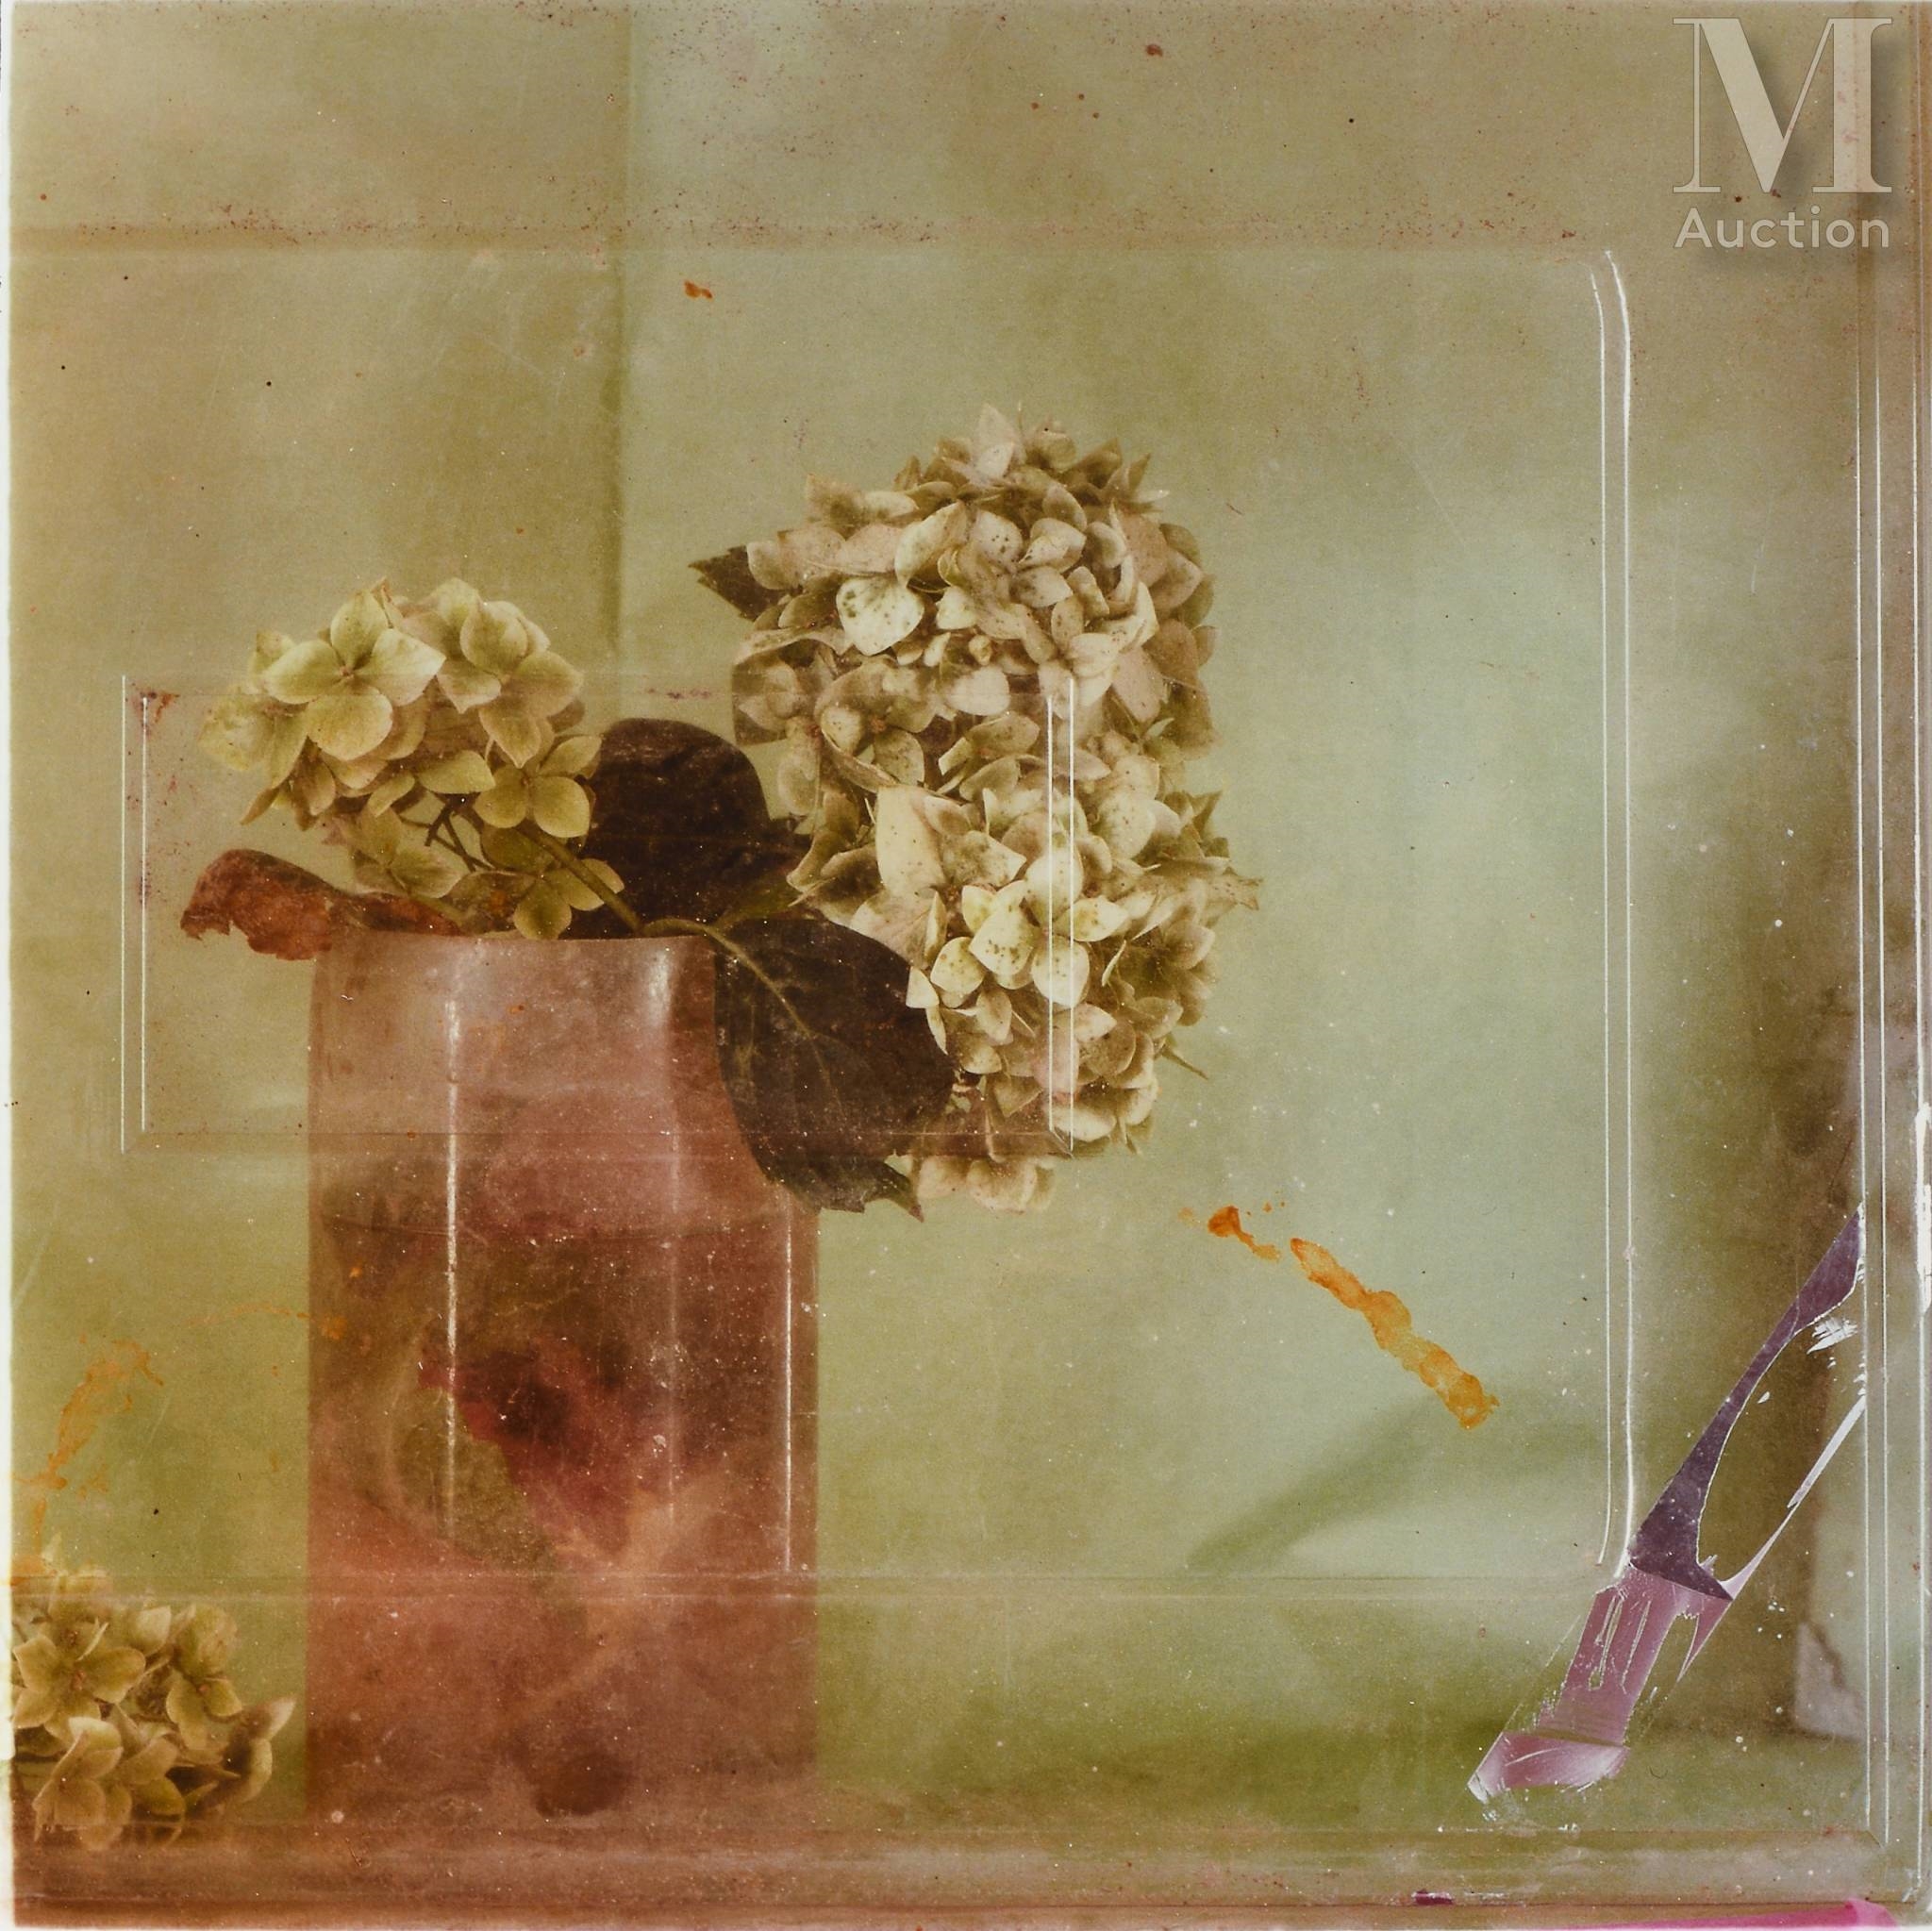 Nature morte n°92 by Toni Catany, 2001